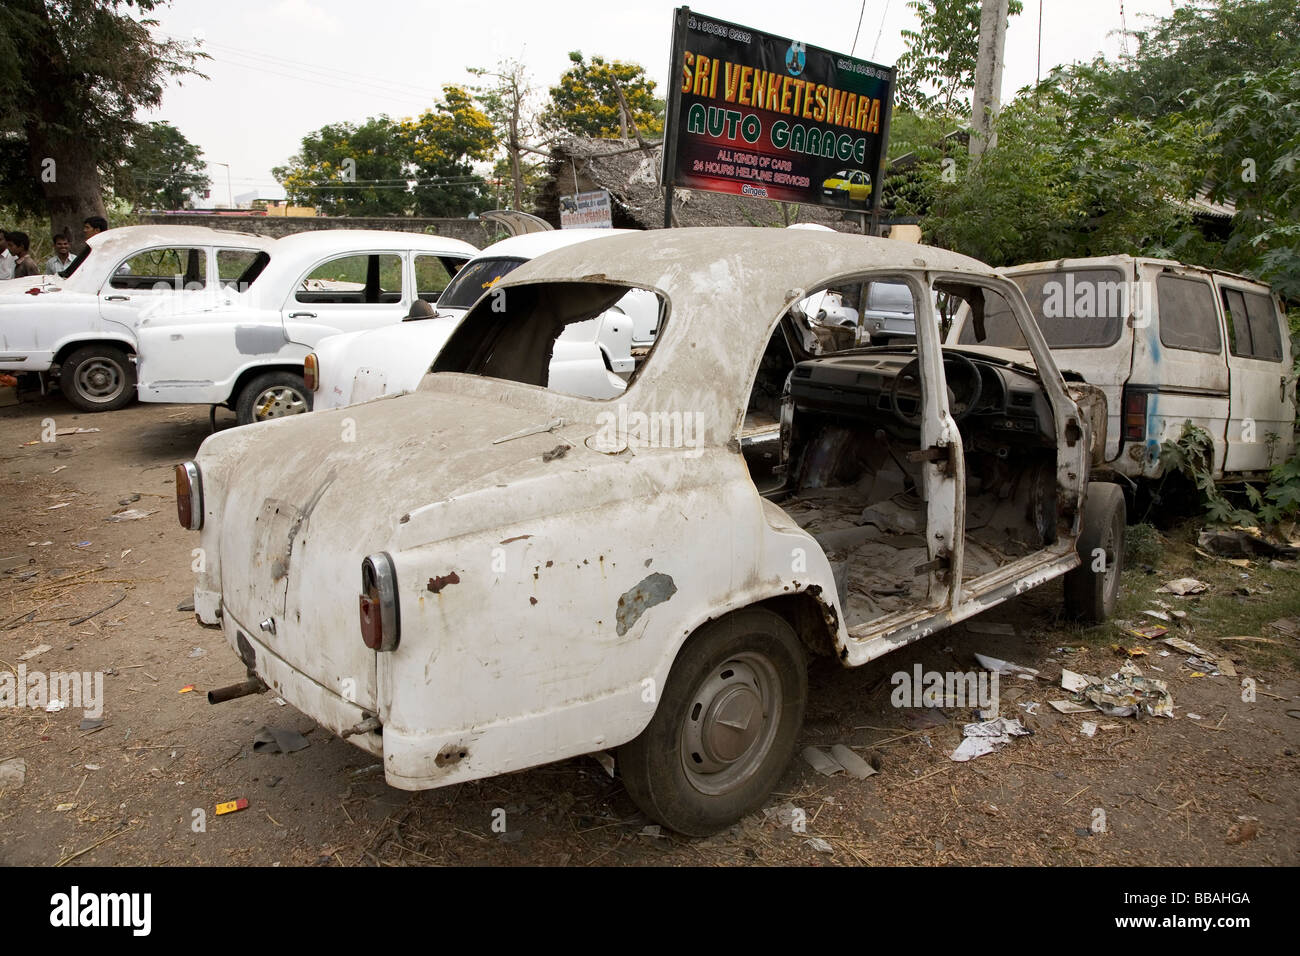 A garage repairs and scraps Ambassador cars in the small Indian town of Gingee in Tamil Nadu. Stock Photo